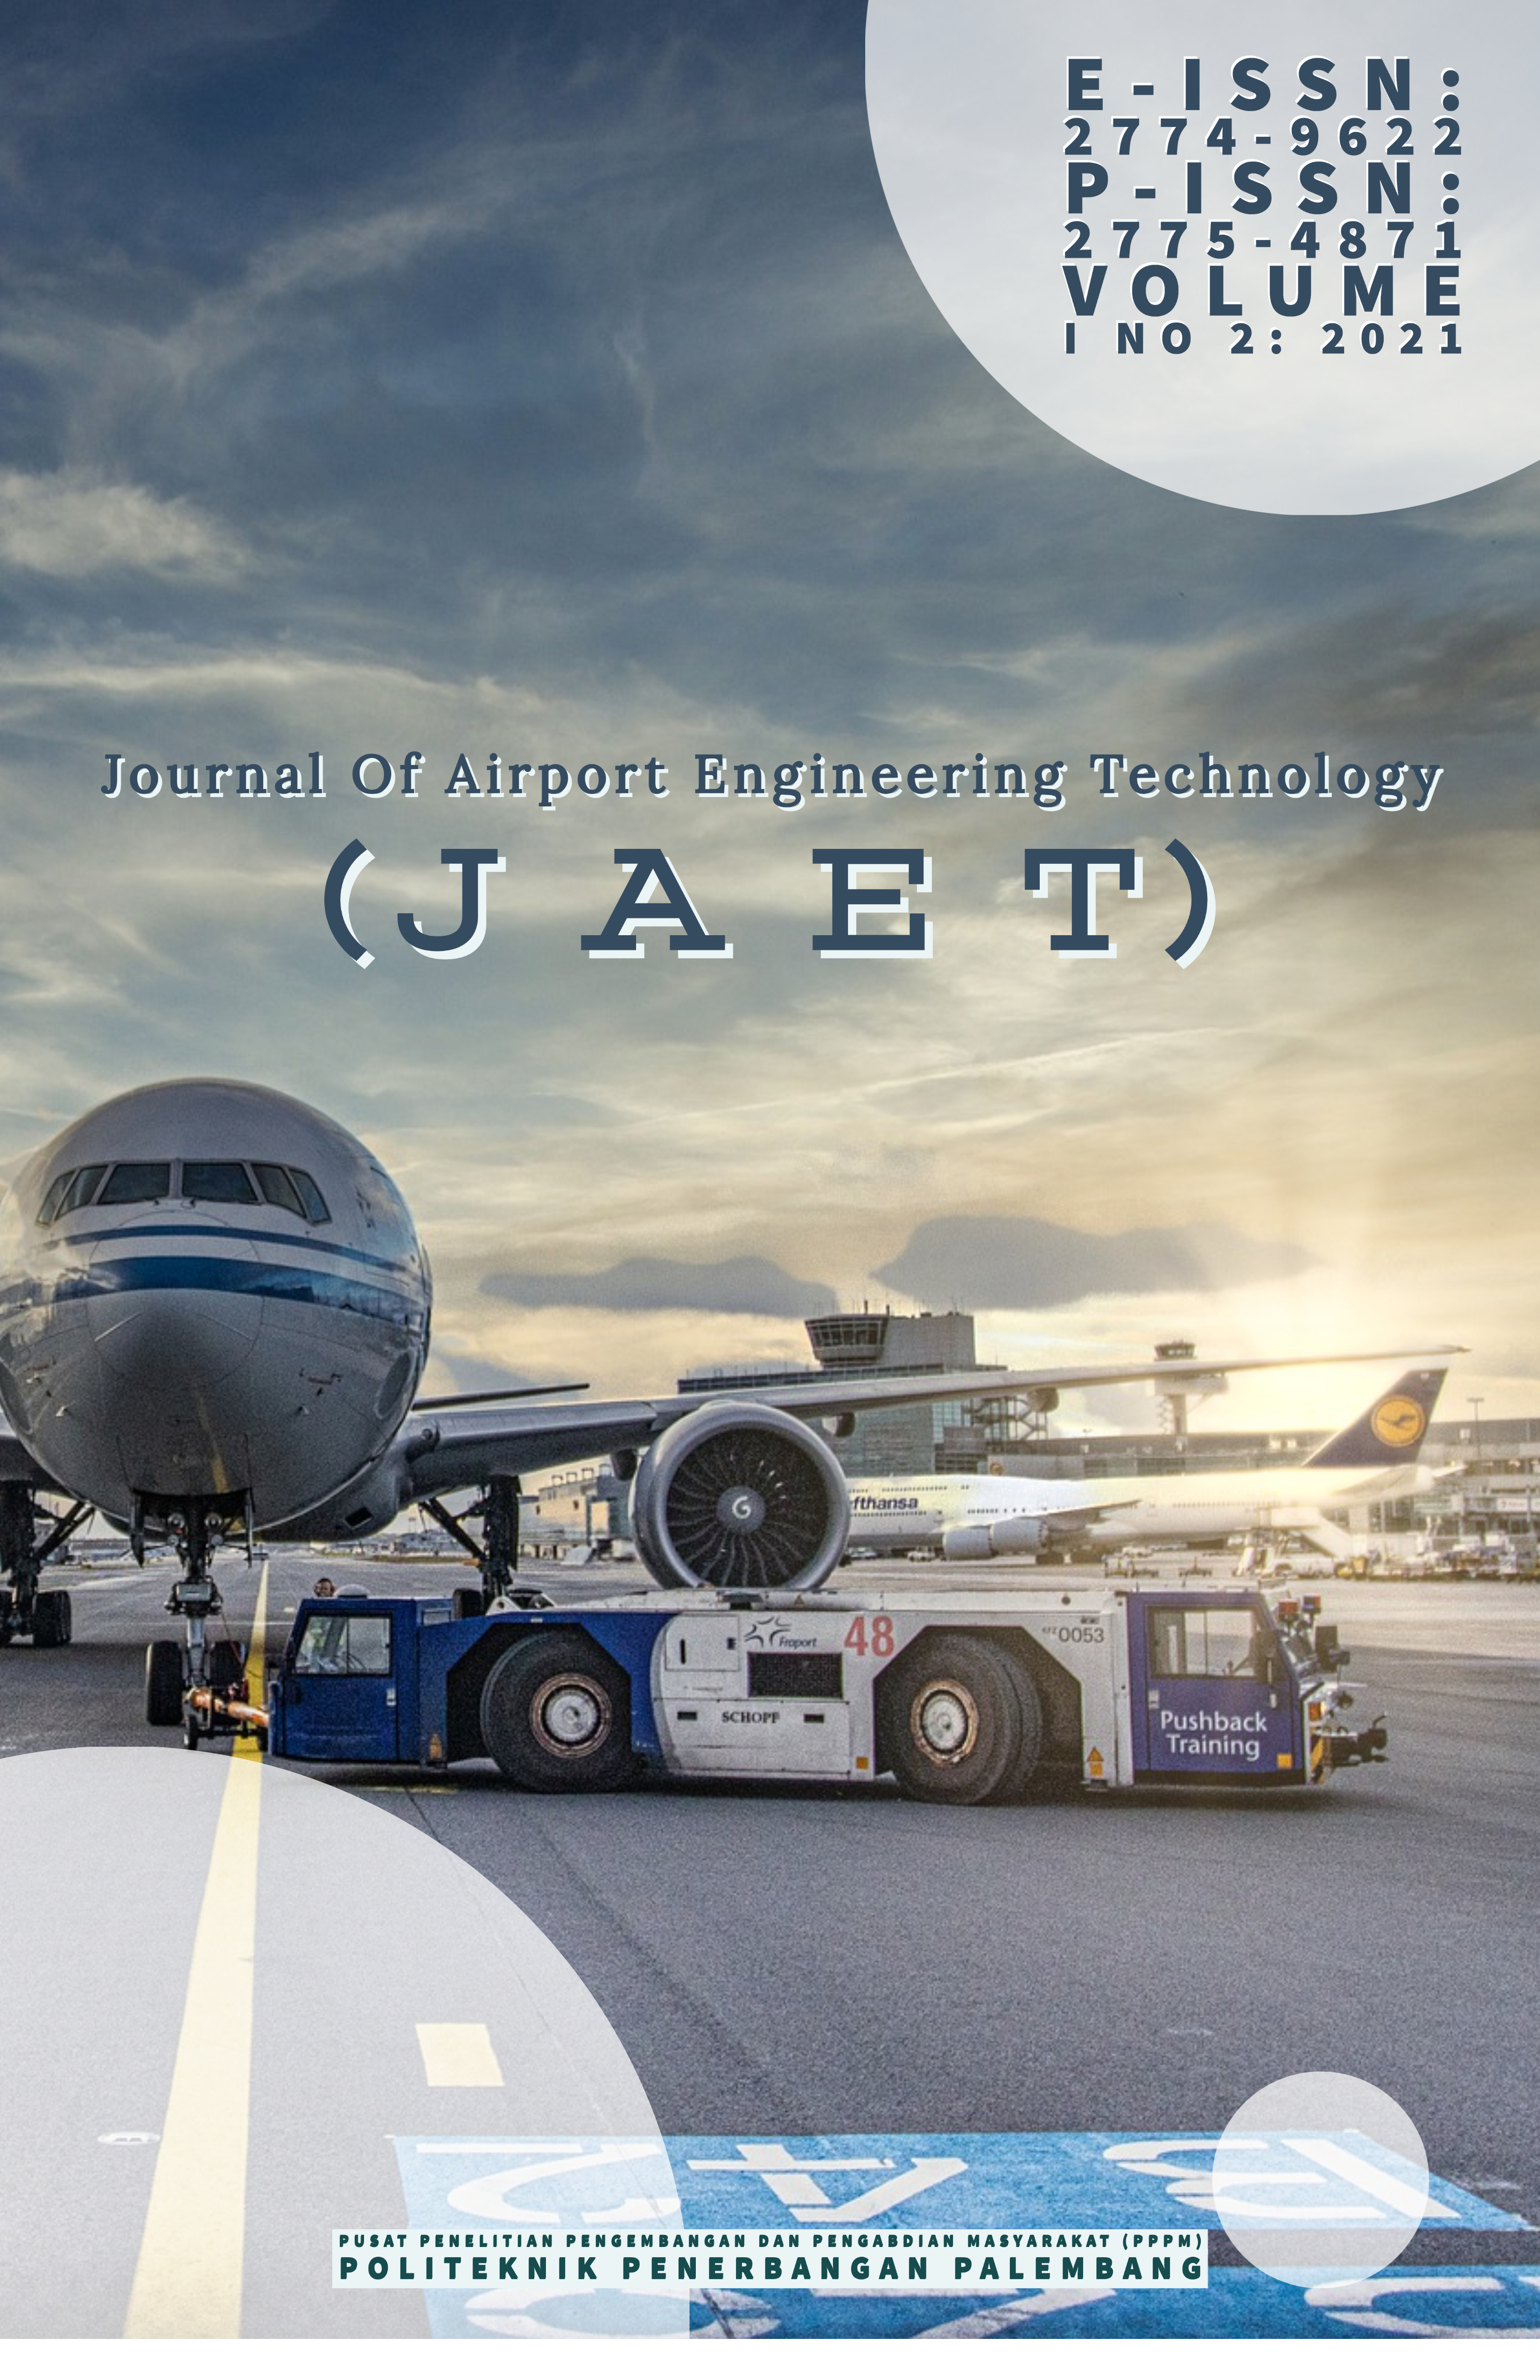 					View Vol. 1 No. 2 (2021): Journal of Airport Engineering Technology (JAET)
				